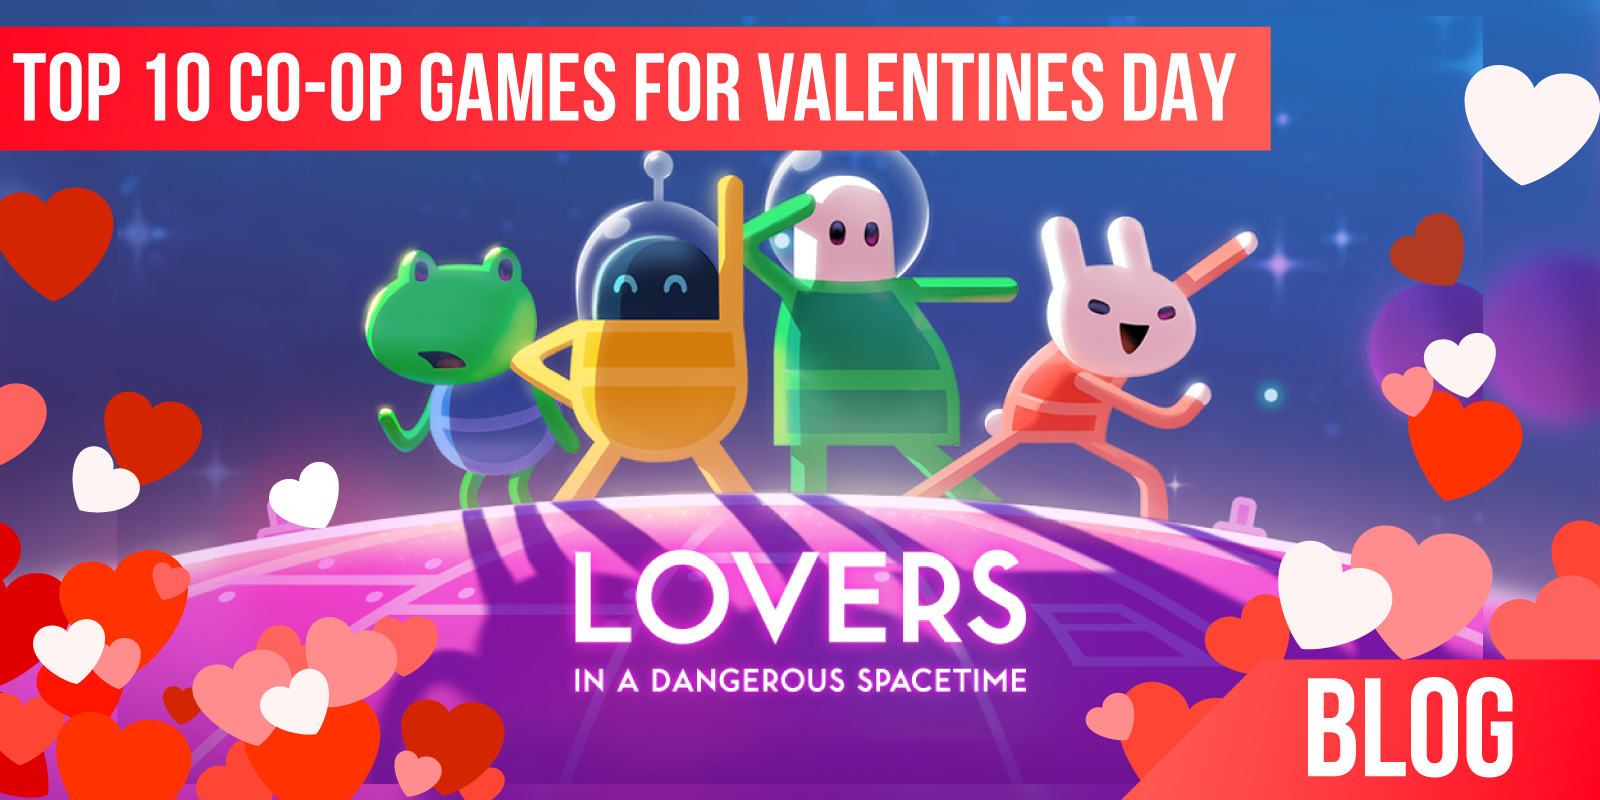 CeX on X: AU:  IE:  UK:   To get ready for Valentine's Day, we've picked out  some of the best couch co-op games to enjoy with your friends or that